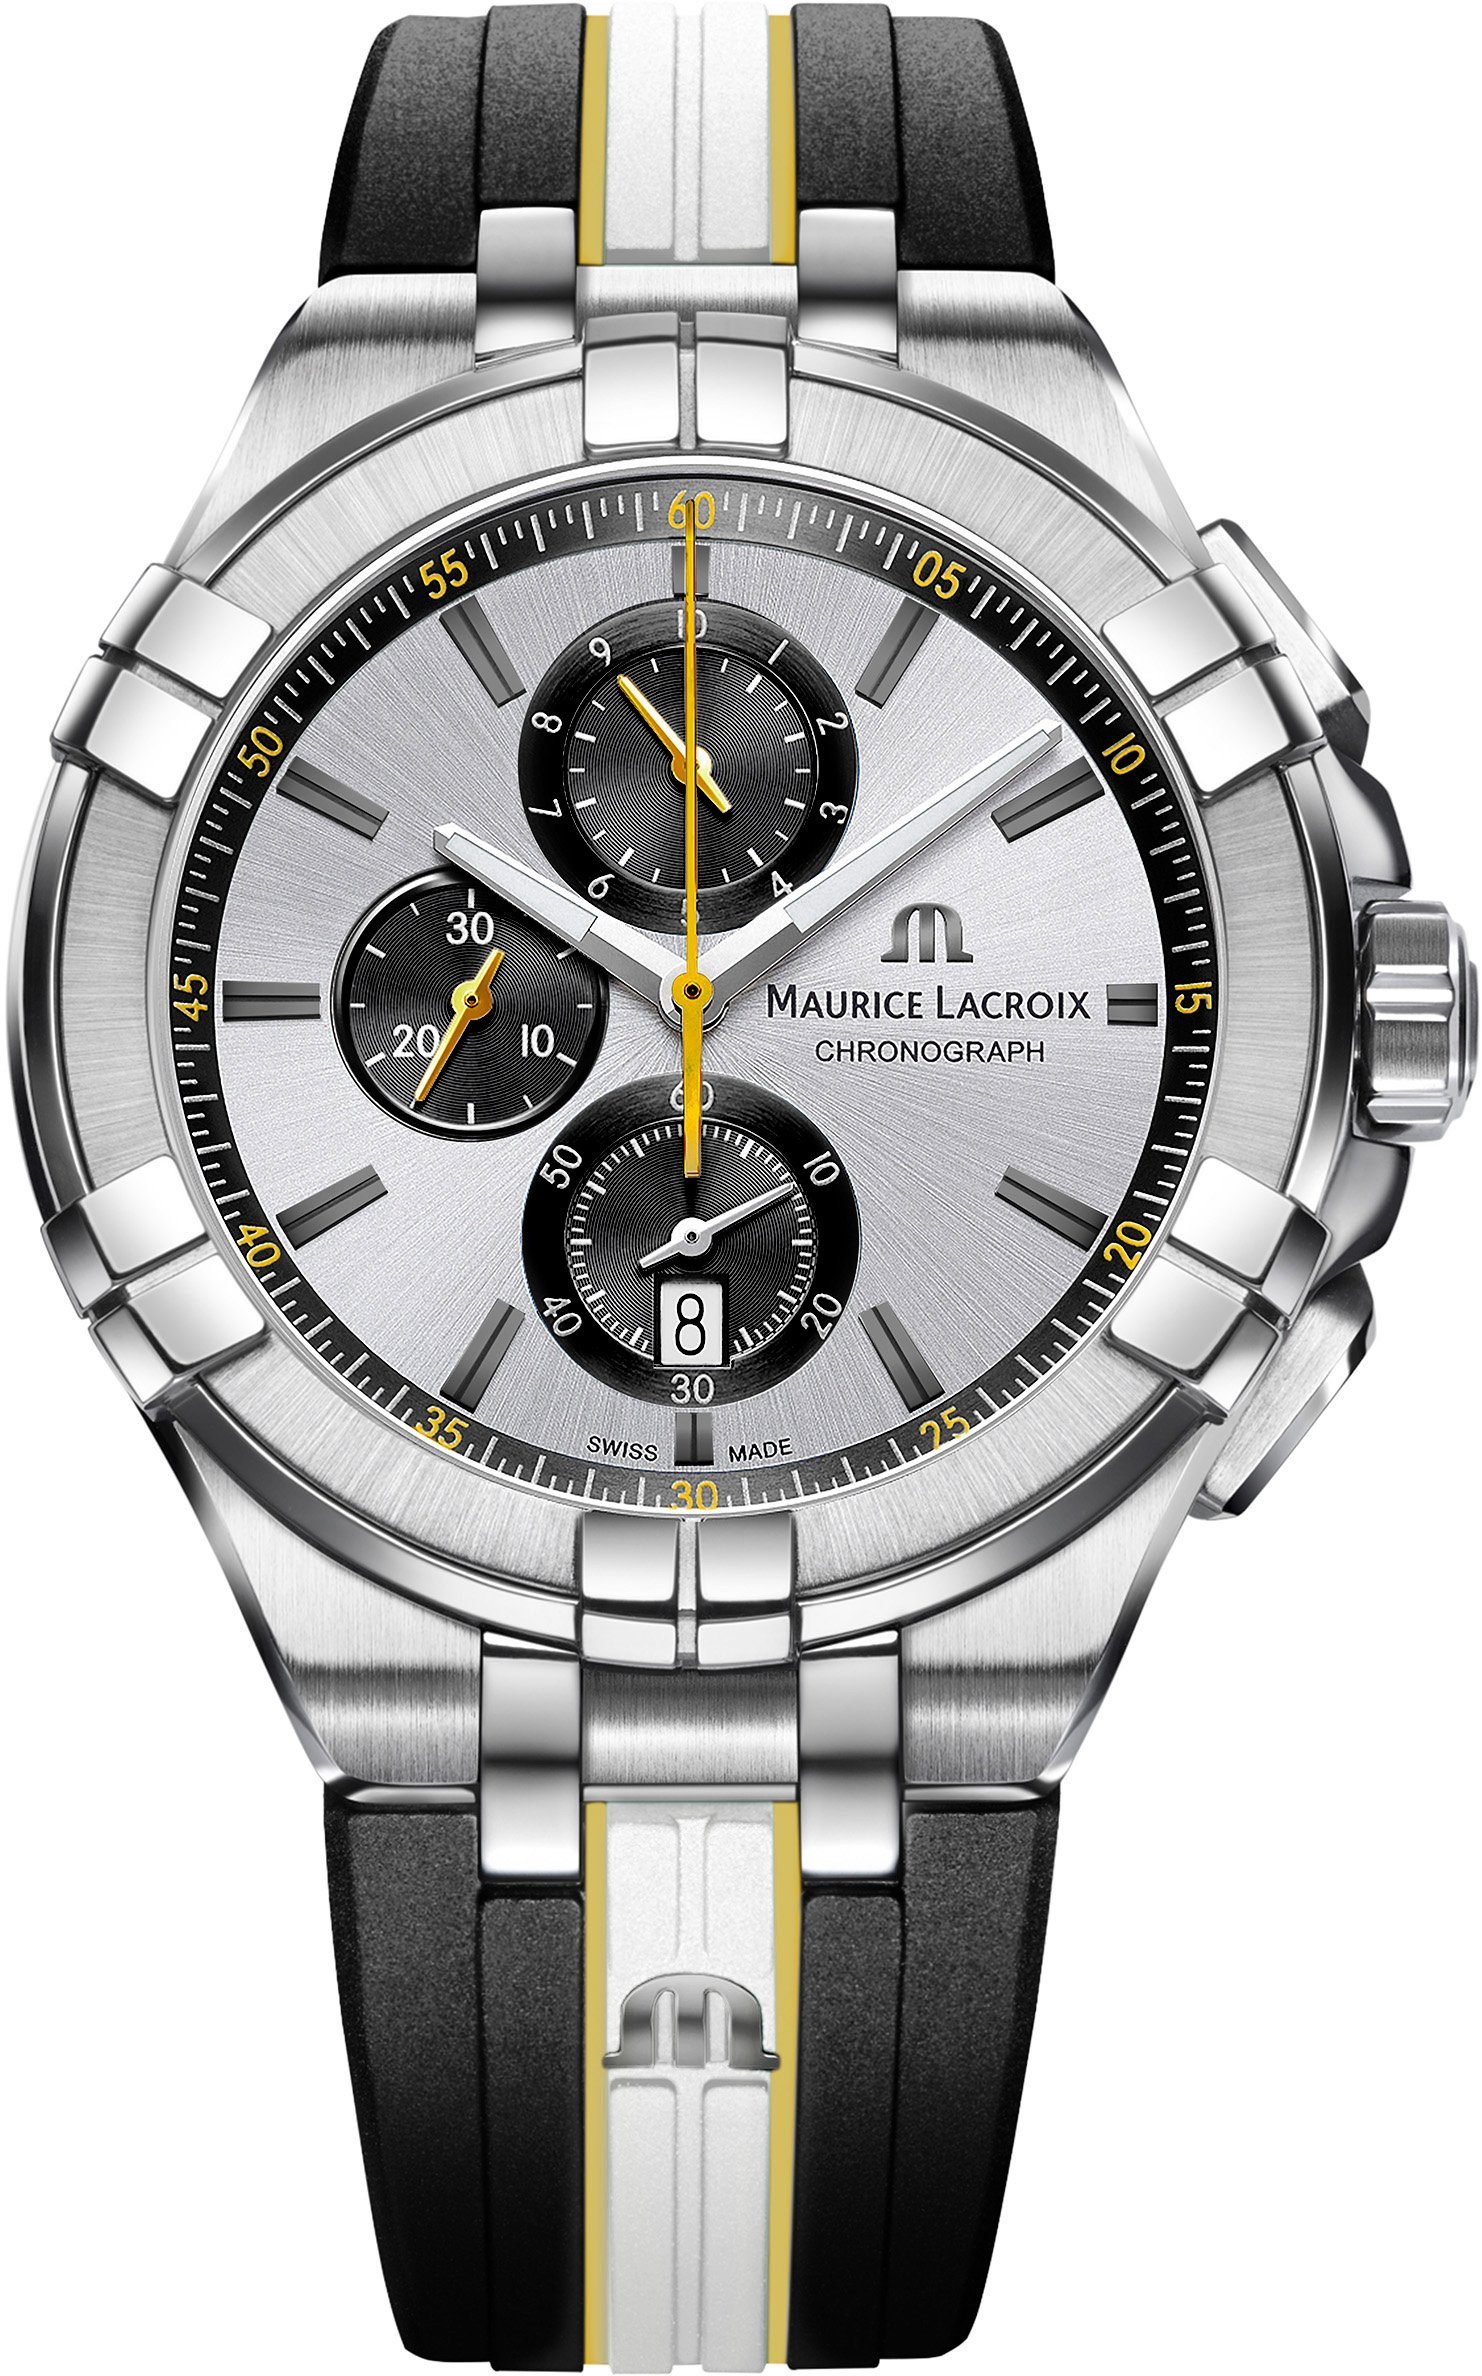 MAURICE LACROIX Chronograph Aikon Chronograph -TT030-130-K, the King AI1018 Court, of Edition Special